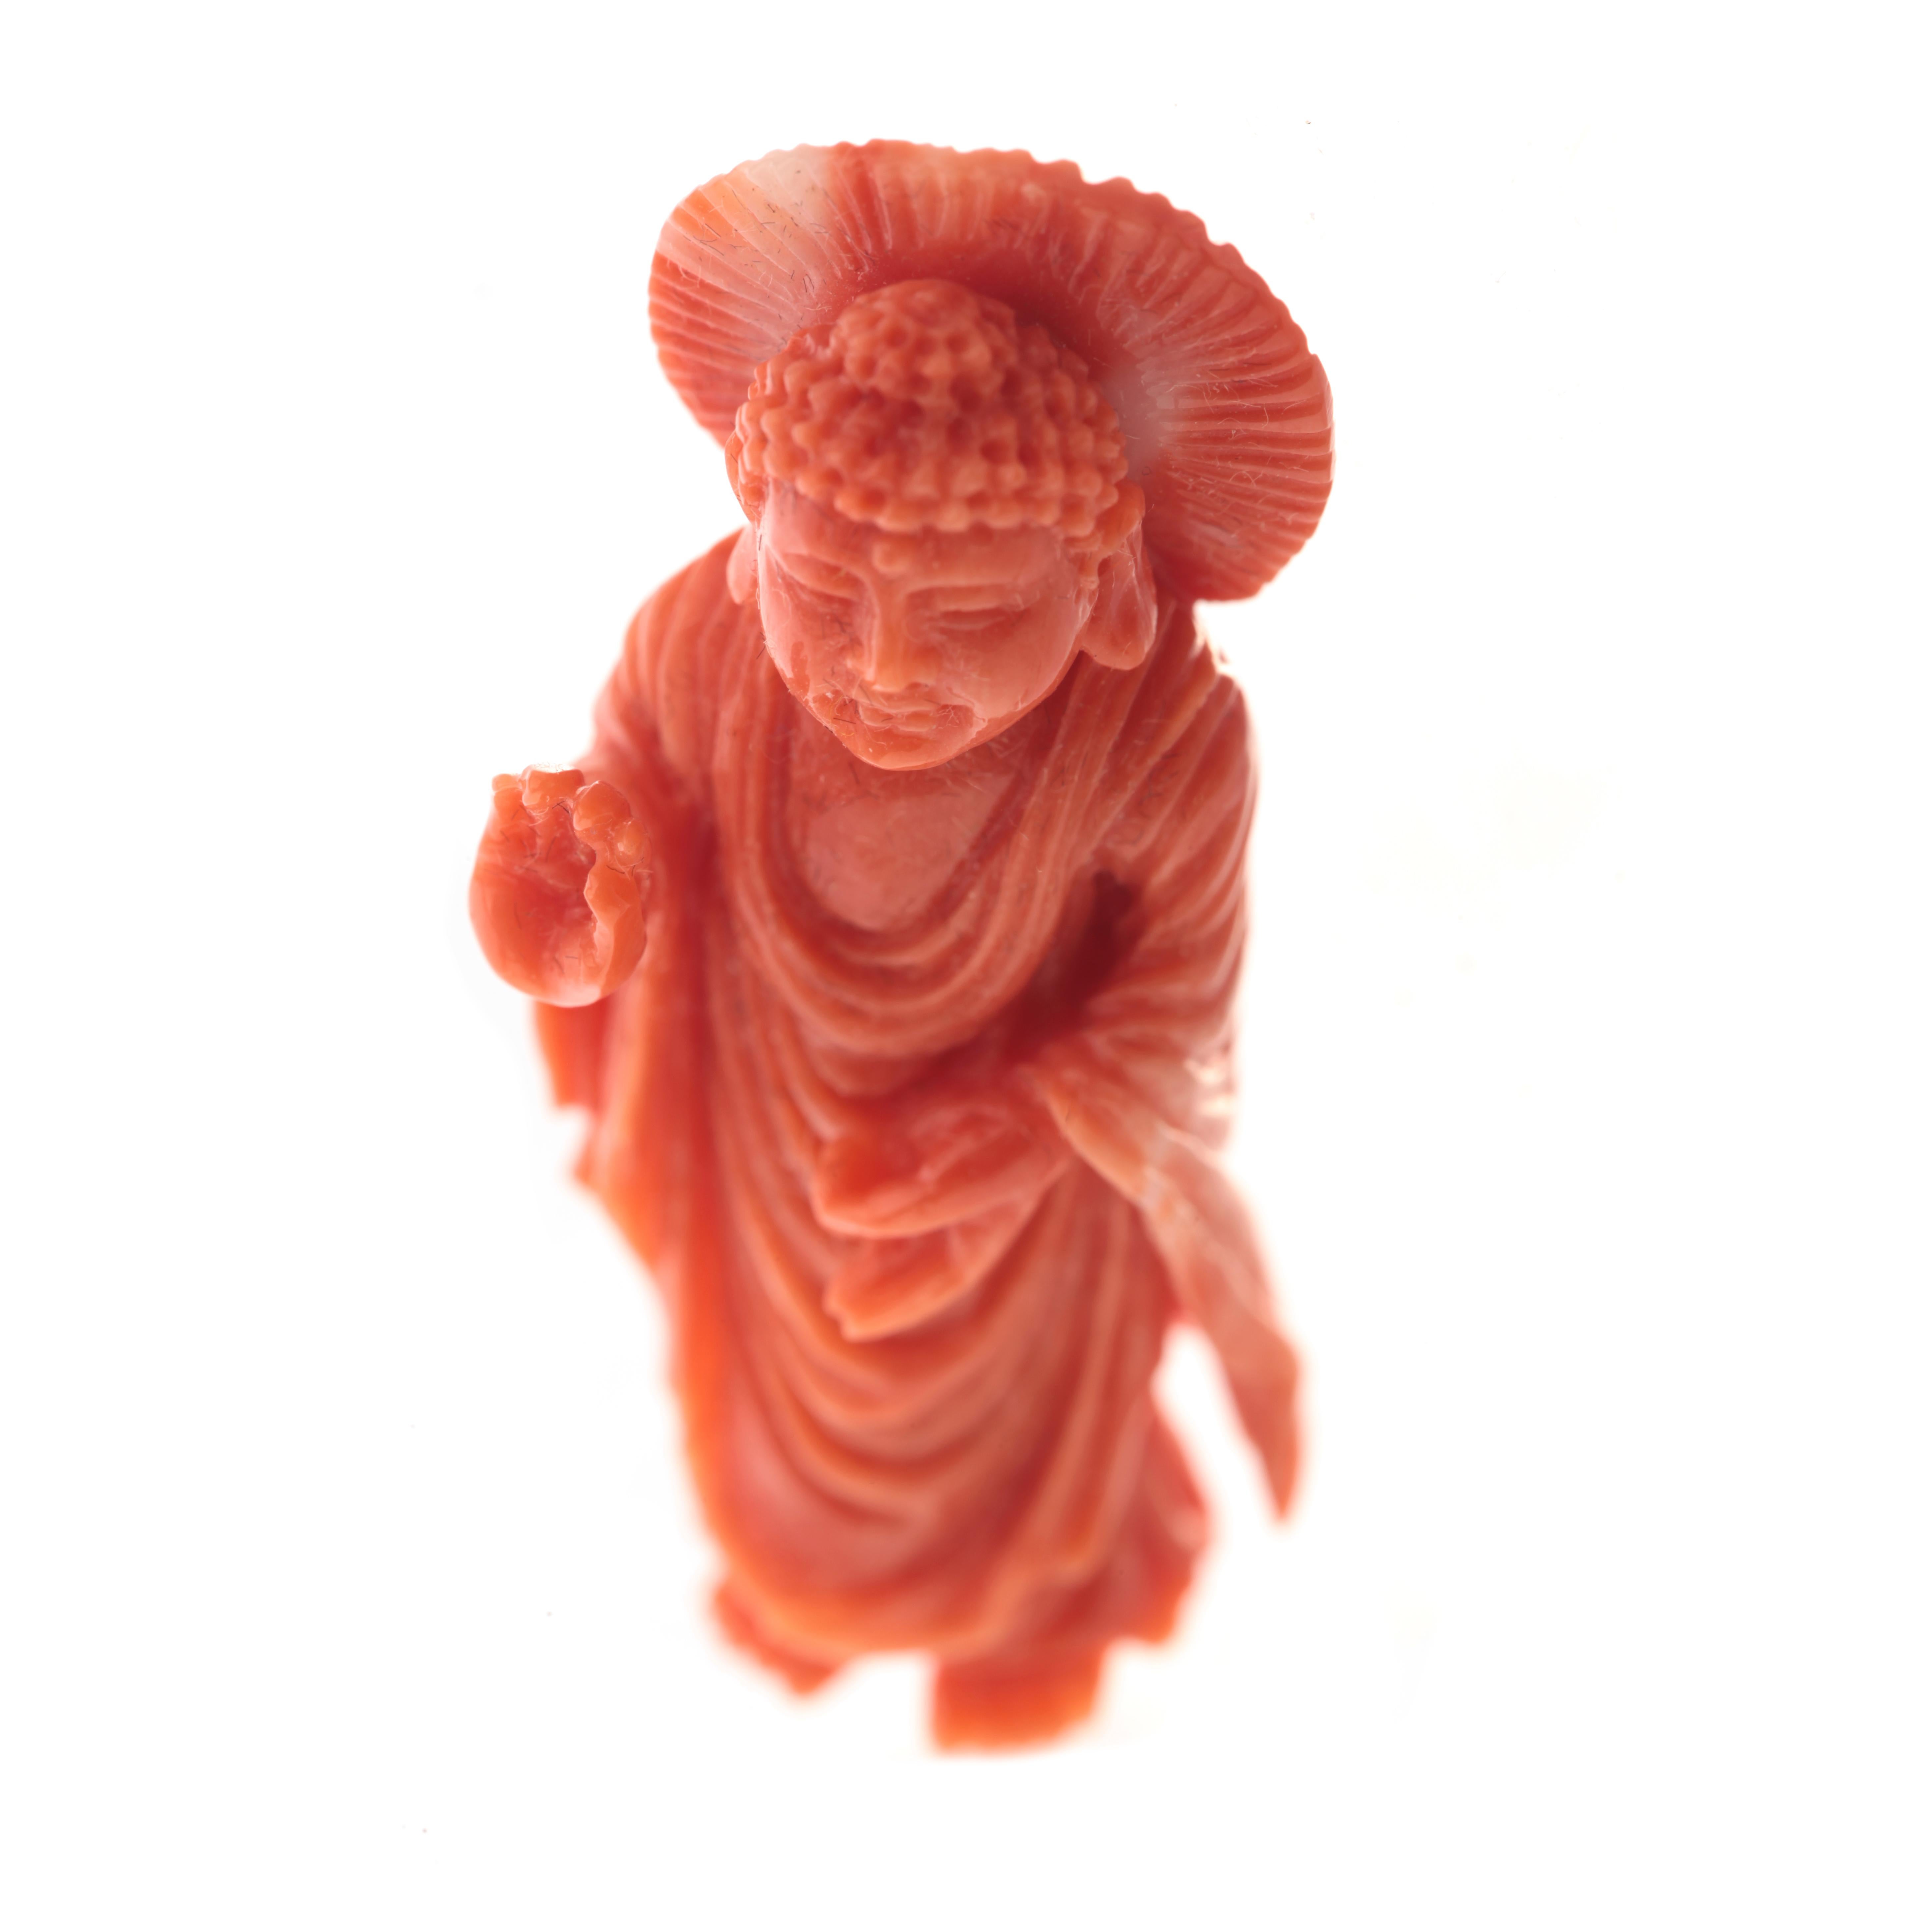 Chinese Buddhist Monk Carved Asian Decorative Art Statue Sculpture Natural Red Coral For Sale